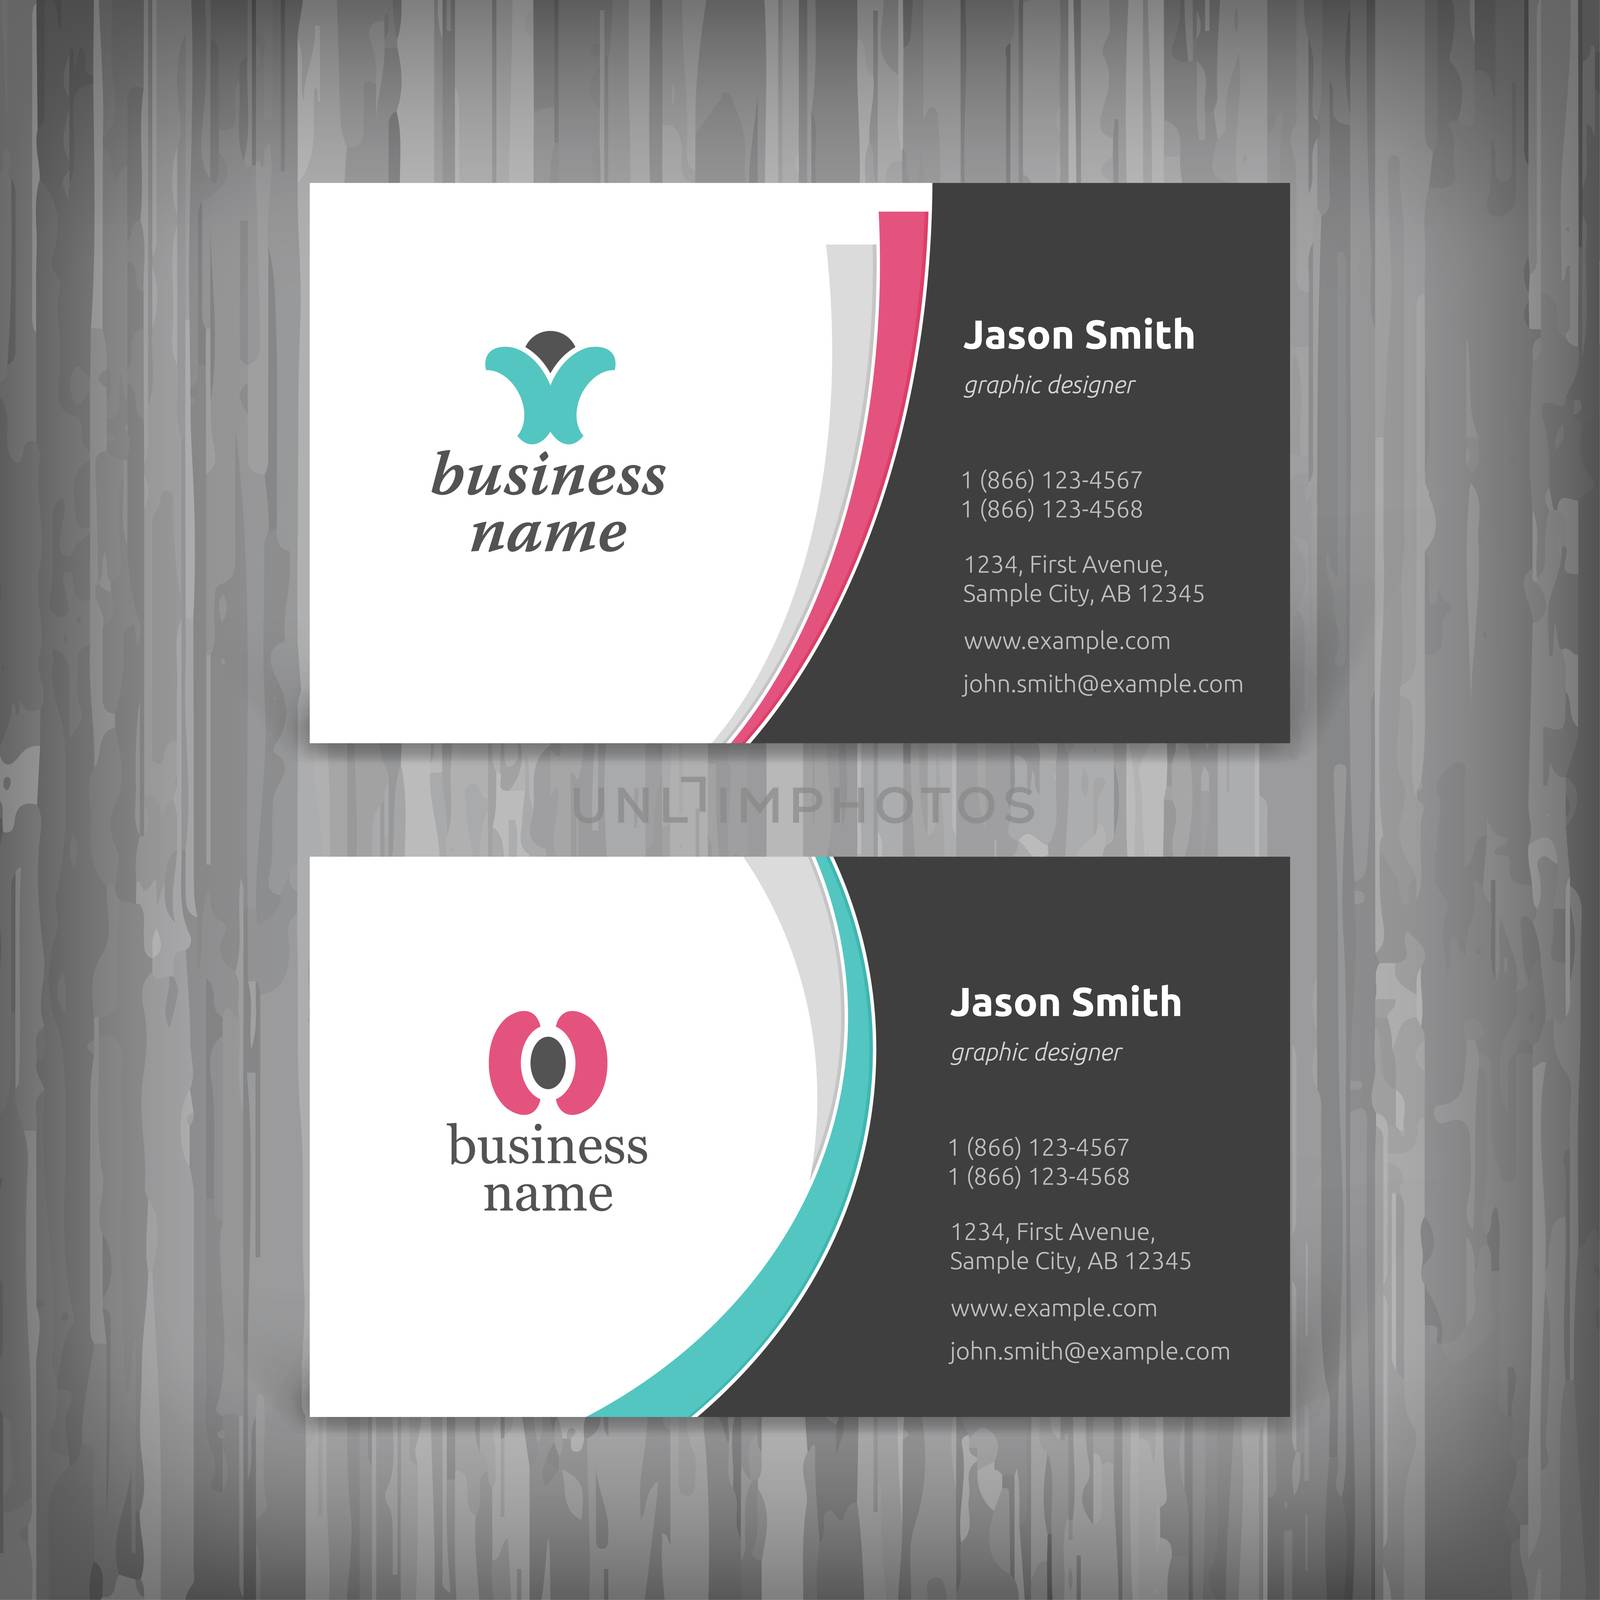 Business cards templates by vtorous